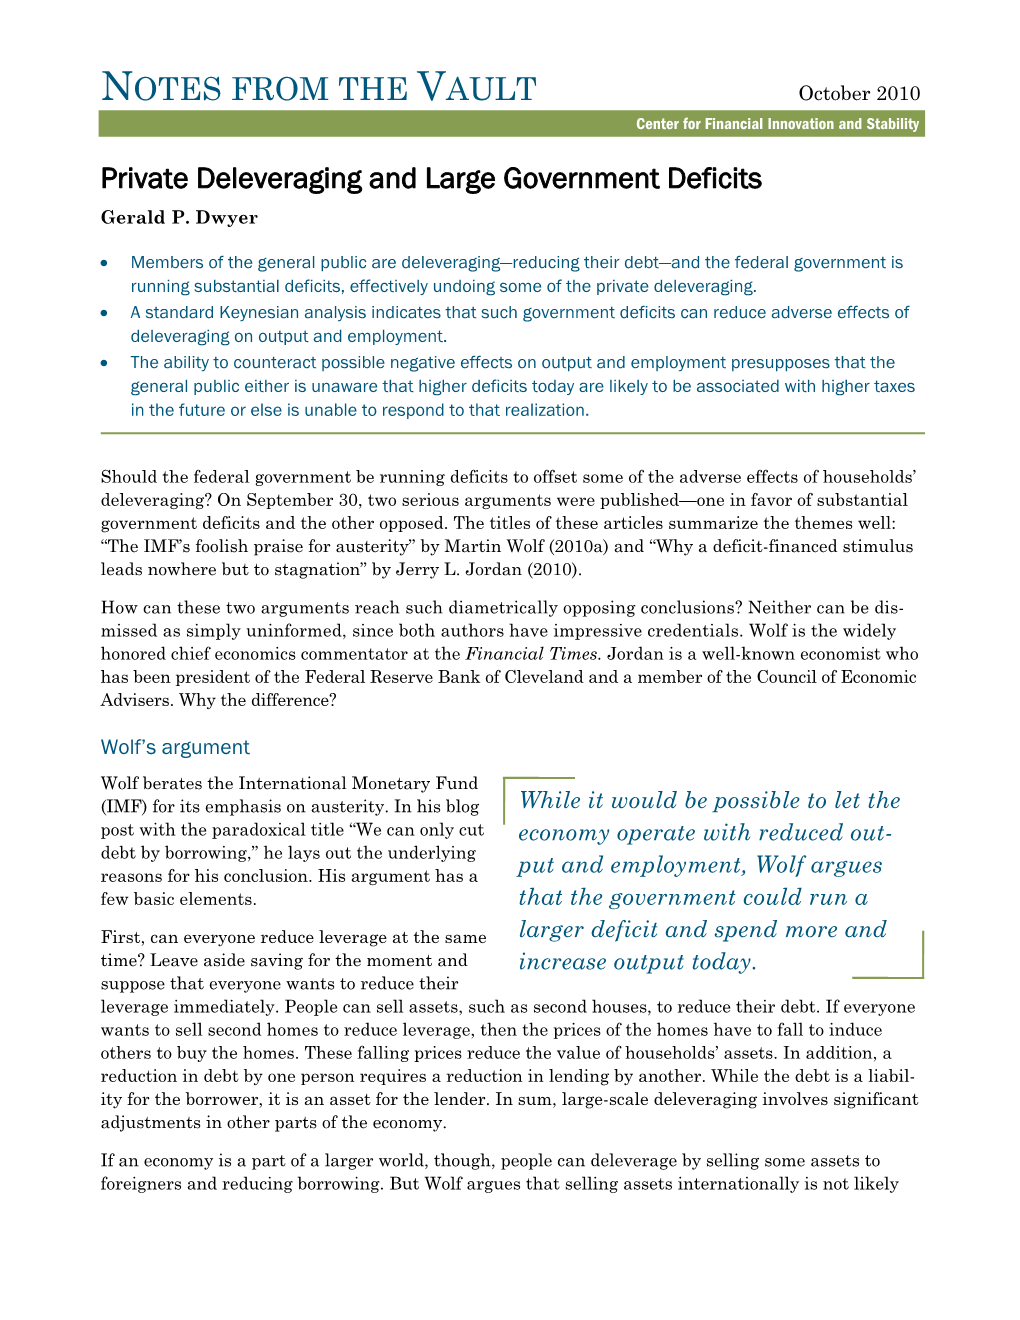 Private Deleveraging and Large Government Deficits Gerald P